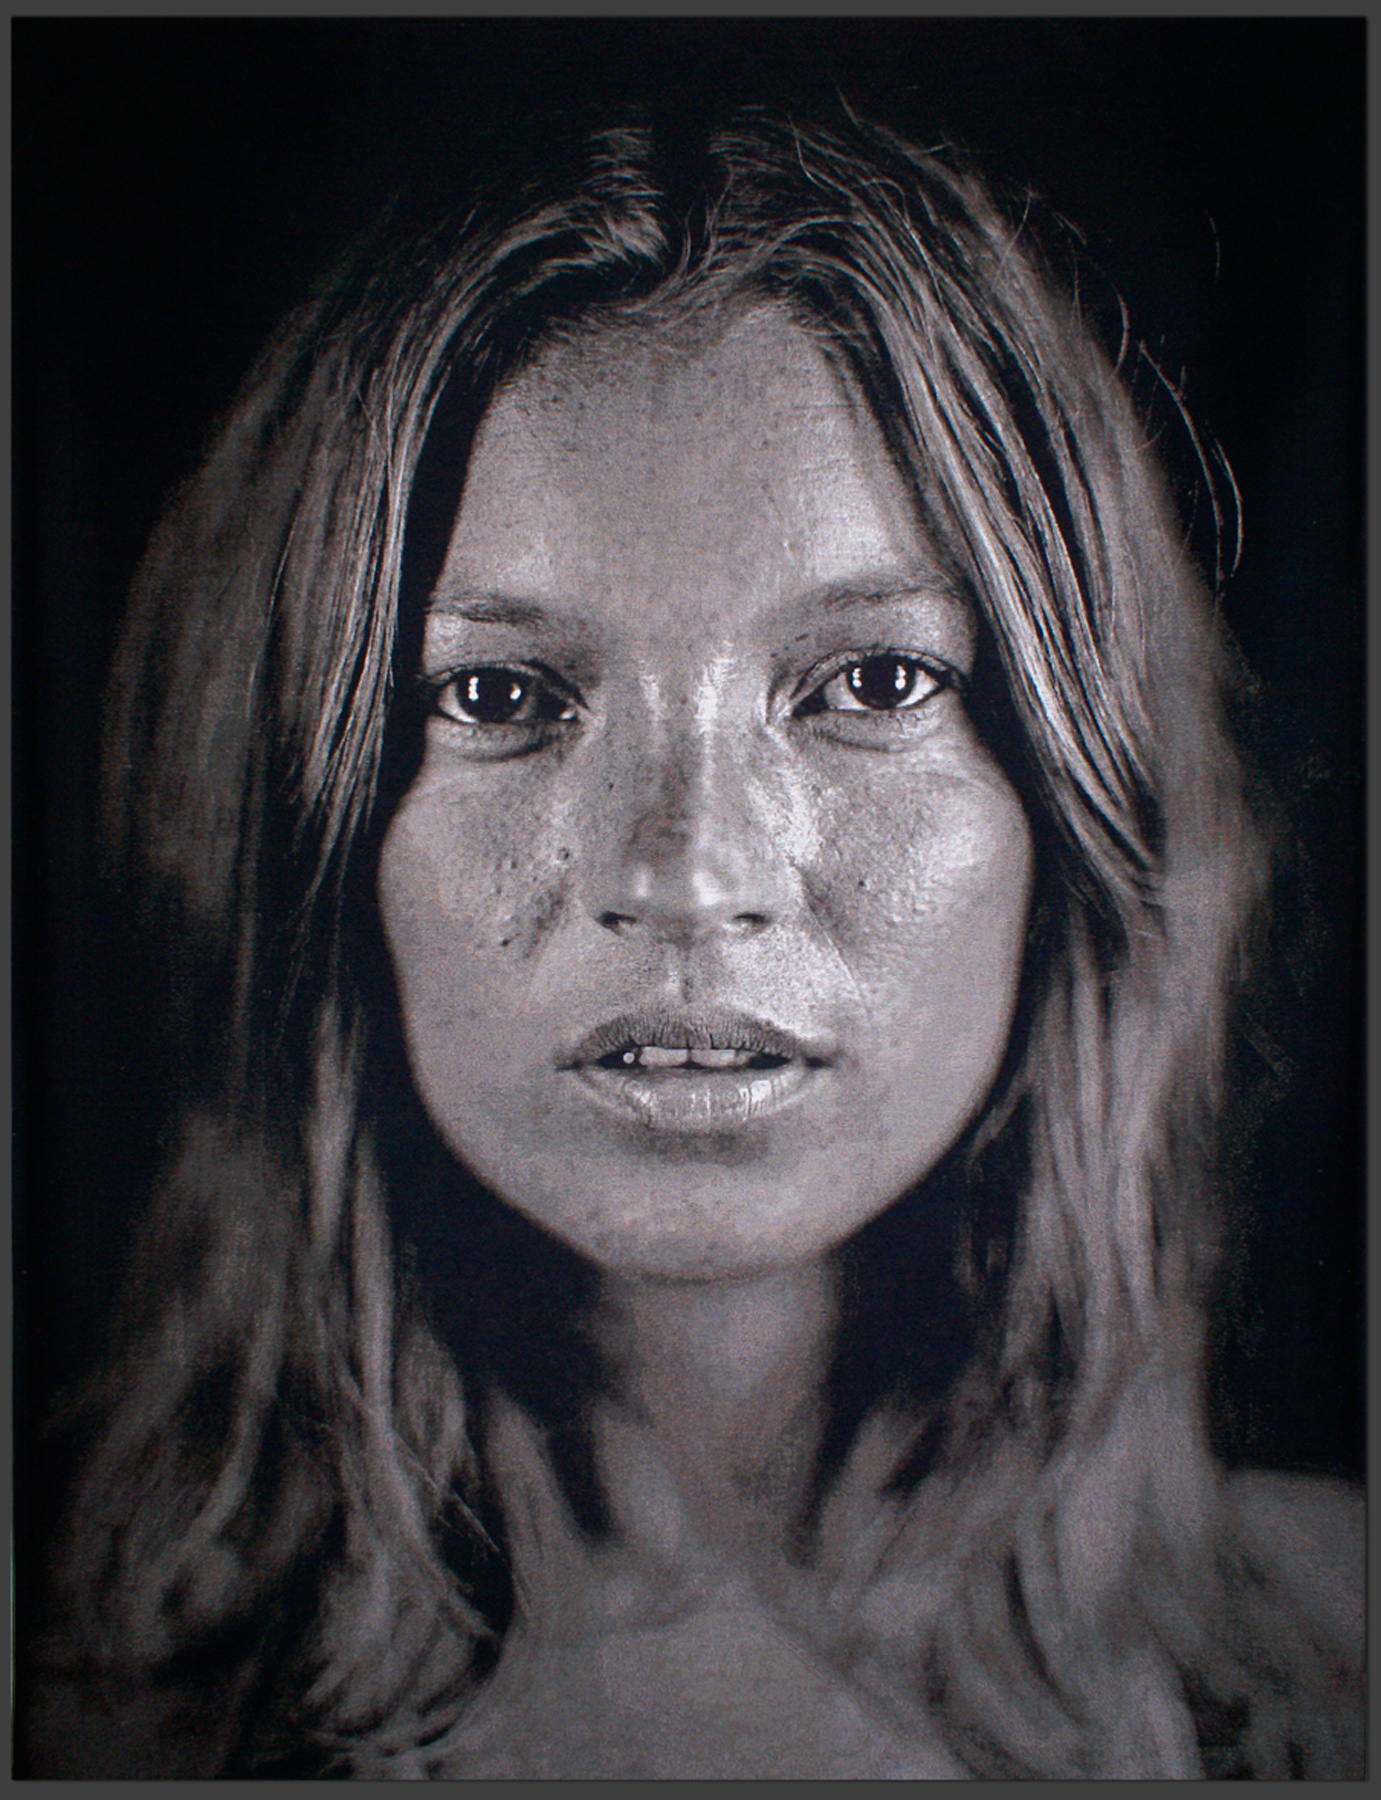 Kate, 2007 by Chuck Close